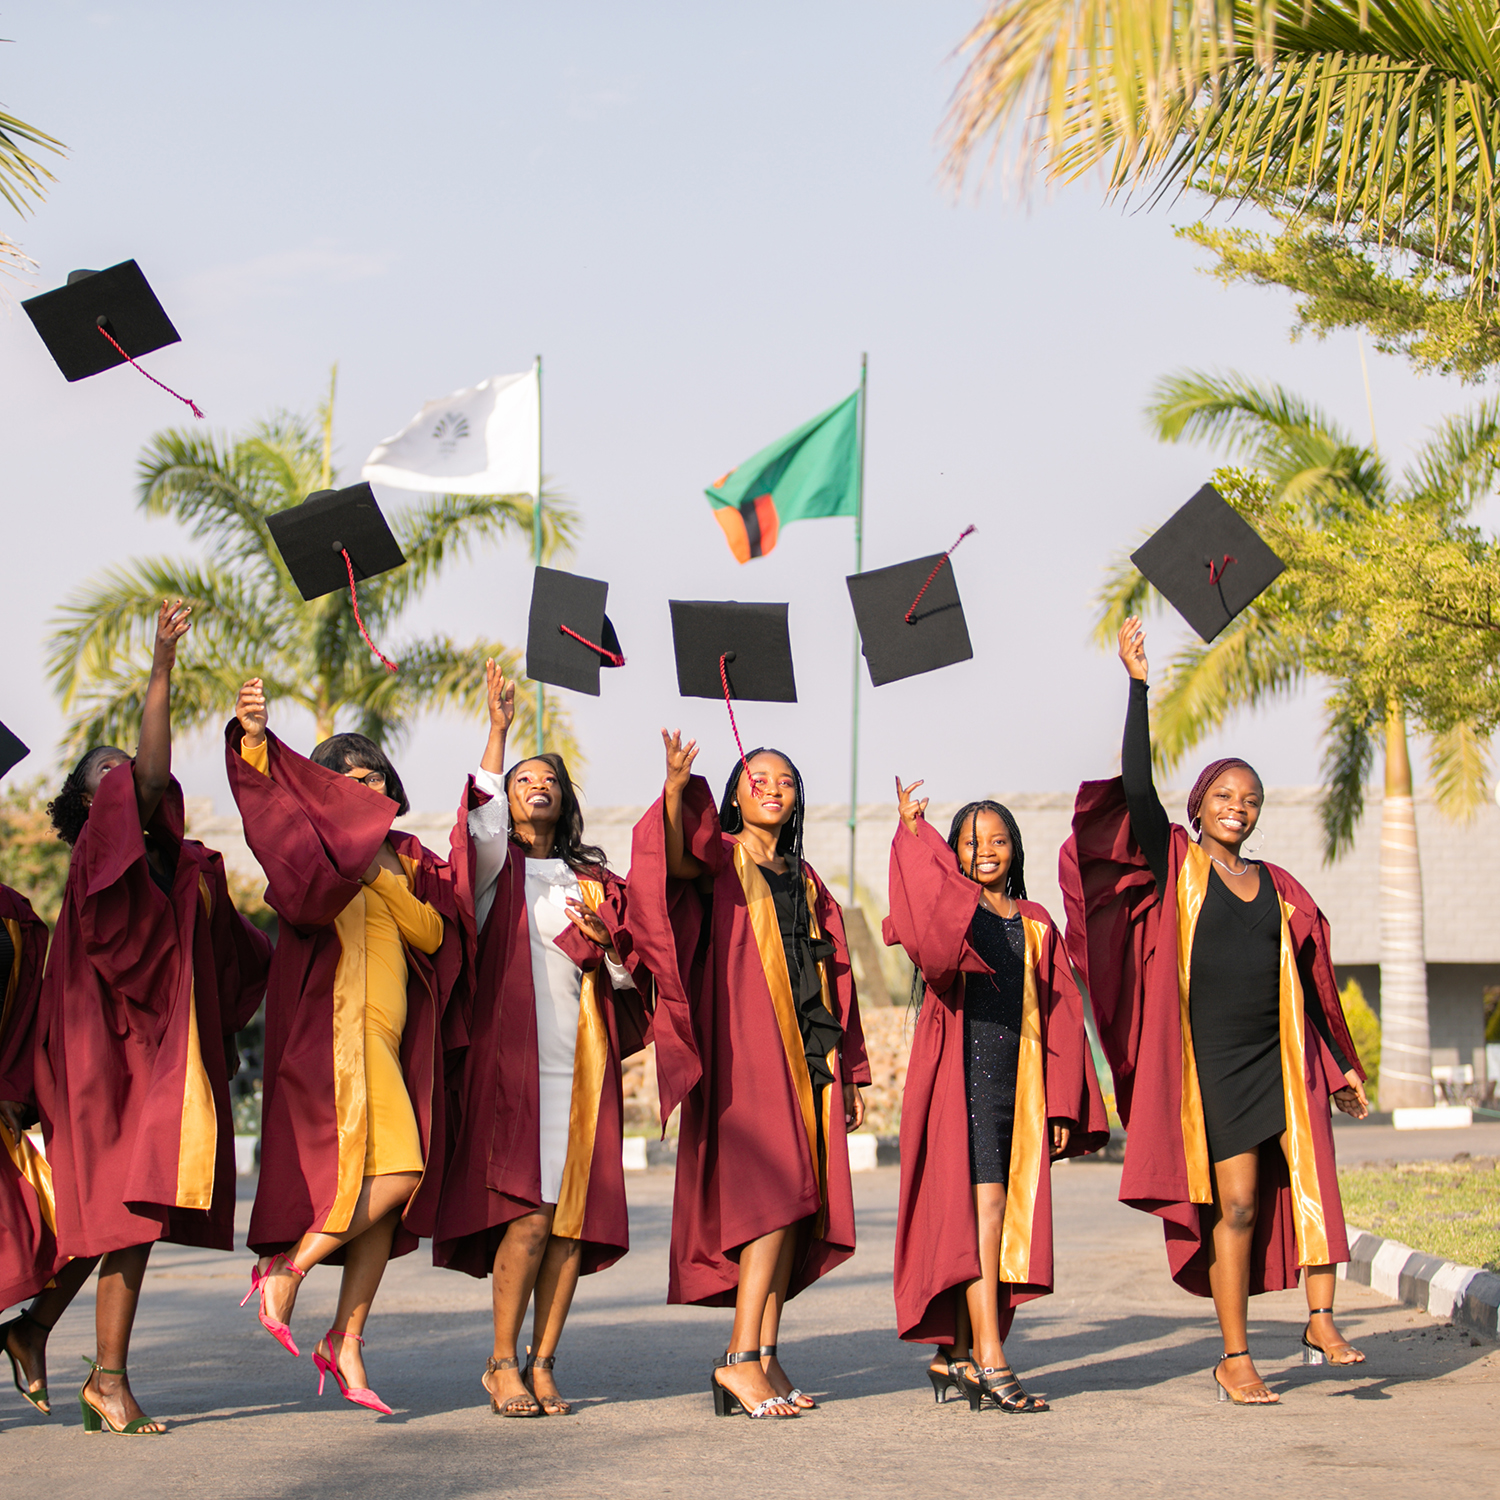 A group of young women in graduation gowns toss their caps in the air in celebration